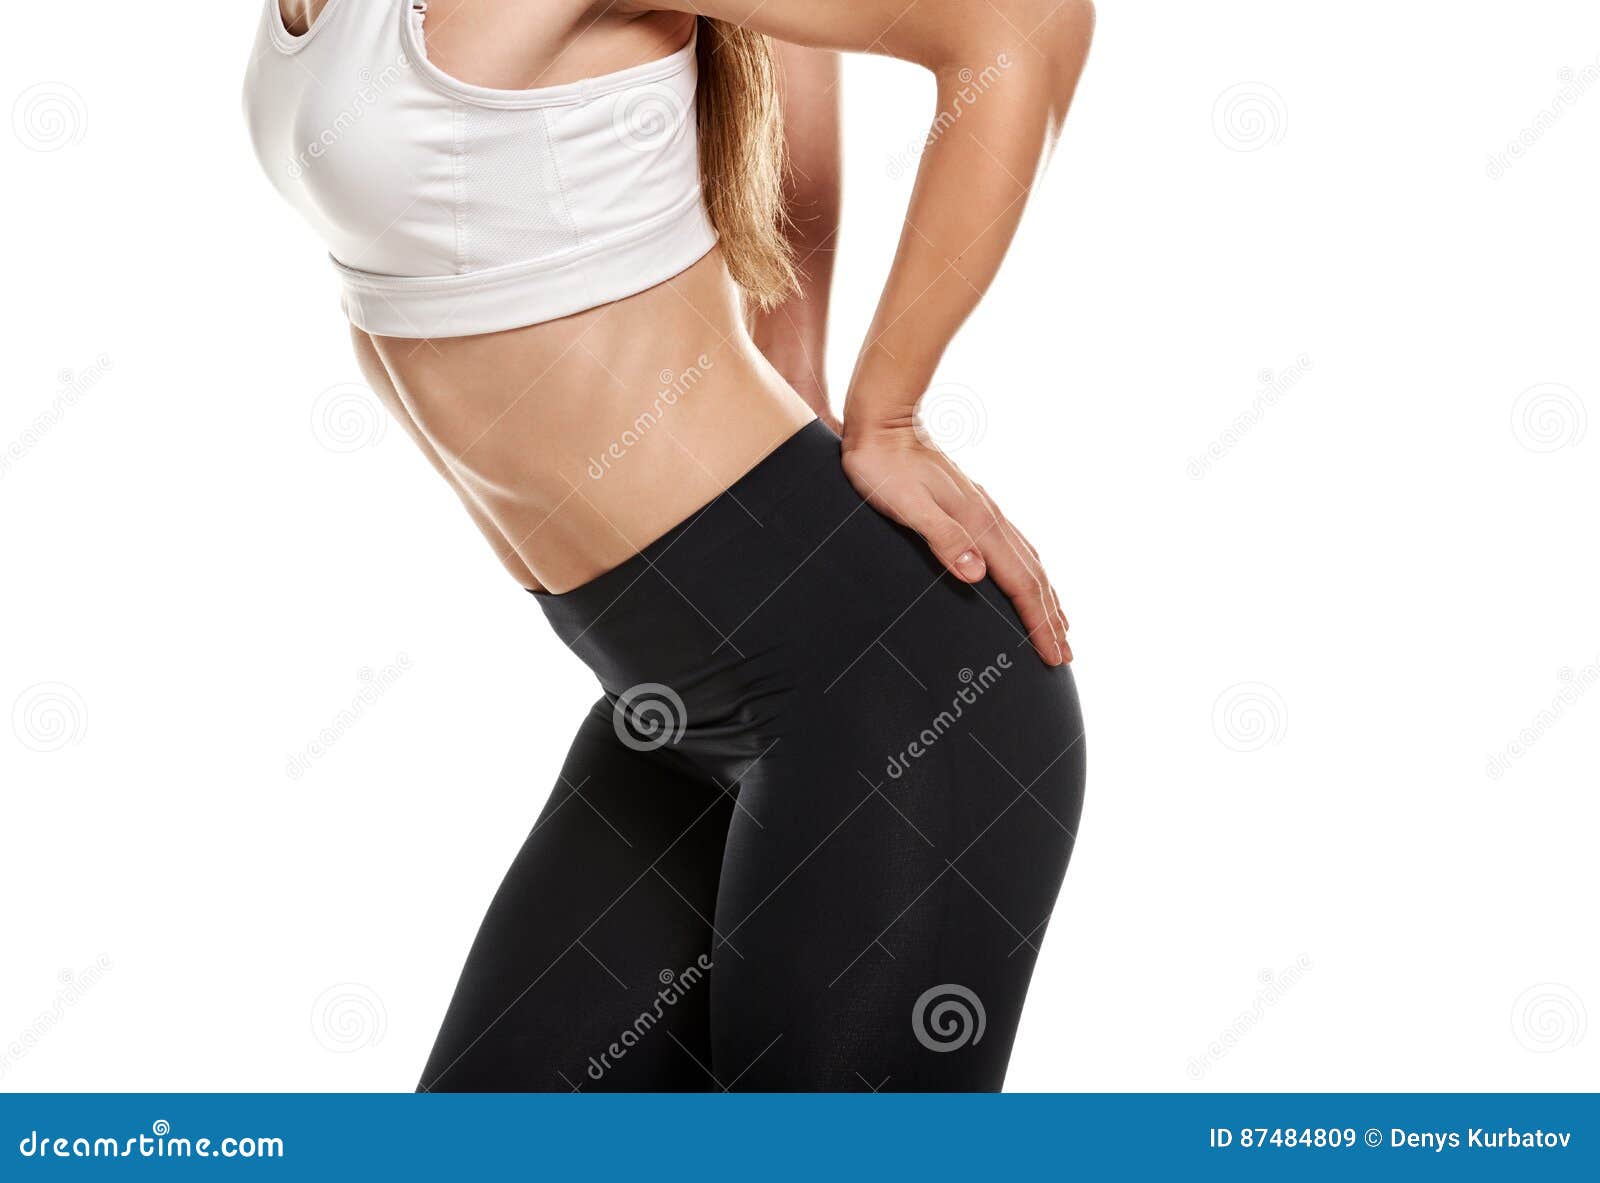 Slim Waist of Young Sporty Woman. Detail of Perfect Fit Female